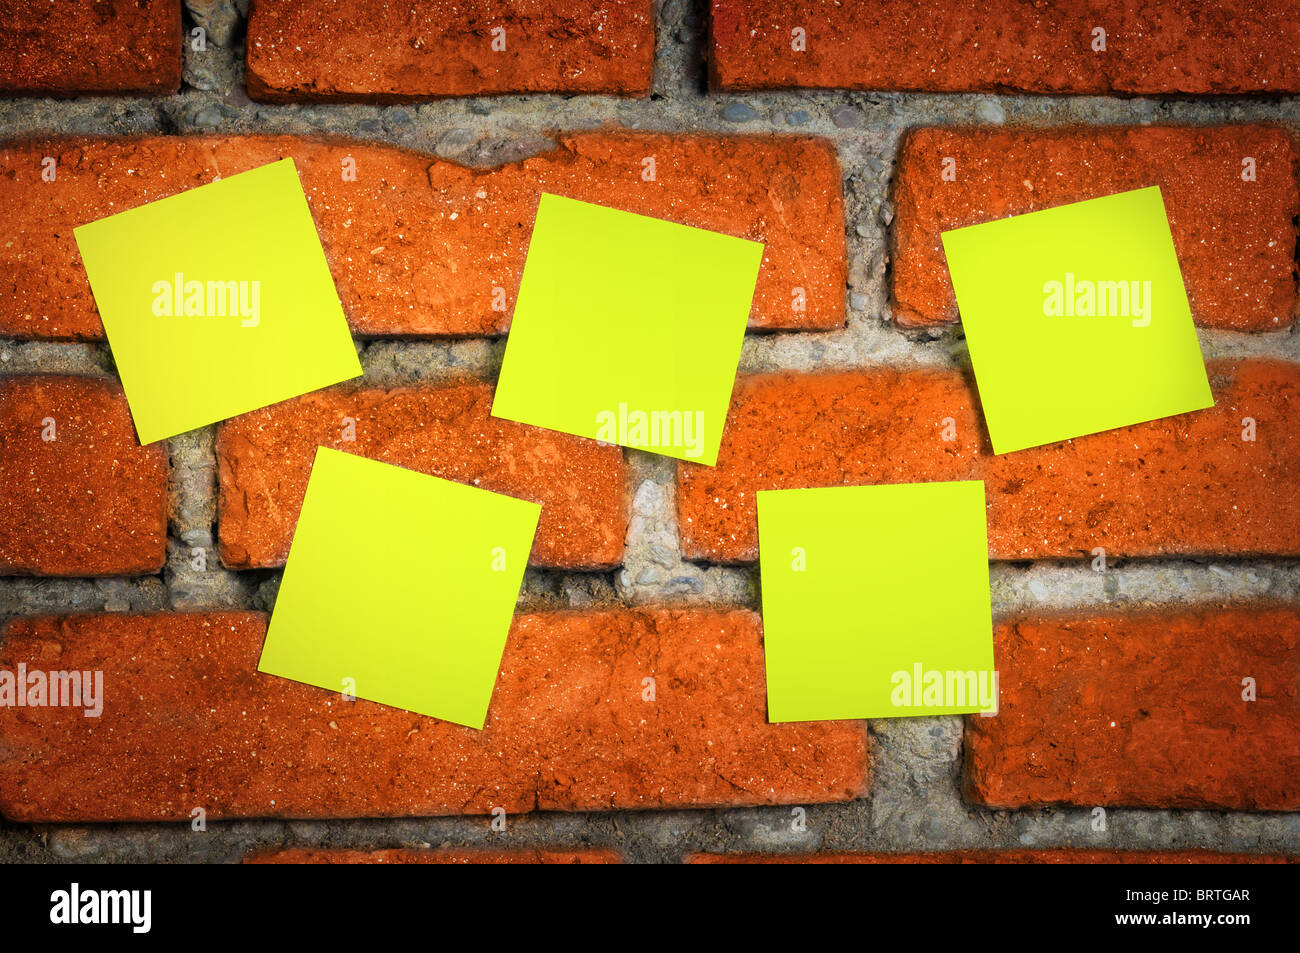 Yellow sticky notes on an old shabby red brick wall. Stock Photo